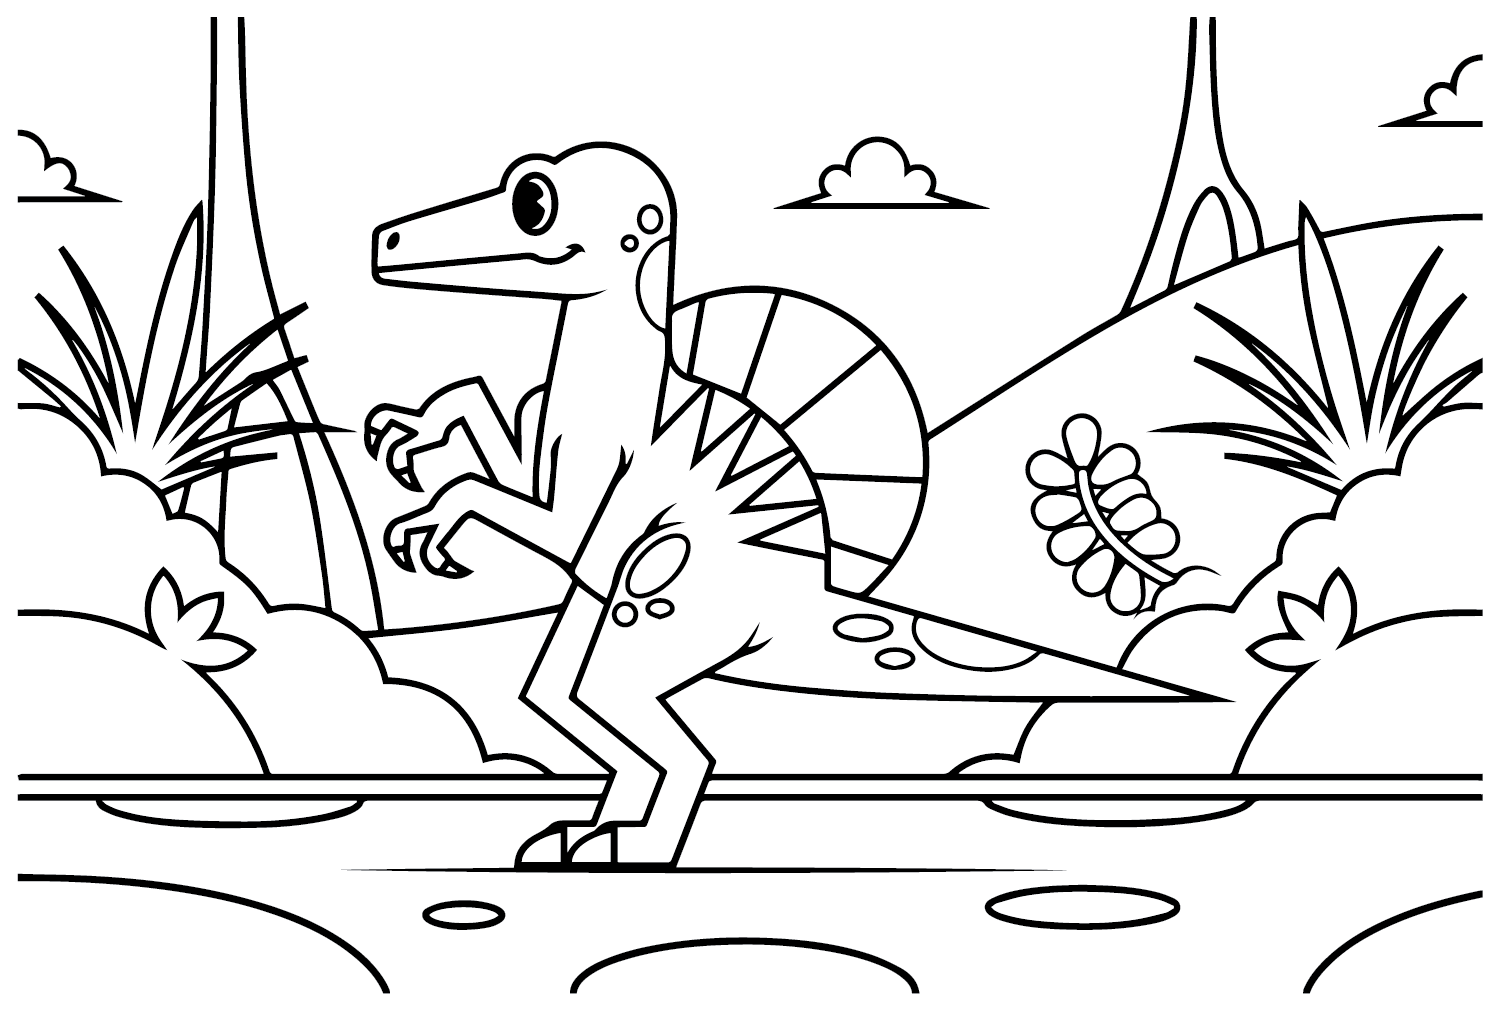 Spinosaurus Aegyptiacus Images to Color from Spinosaurus Aegyptiacus